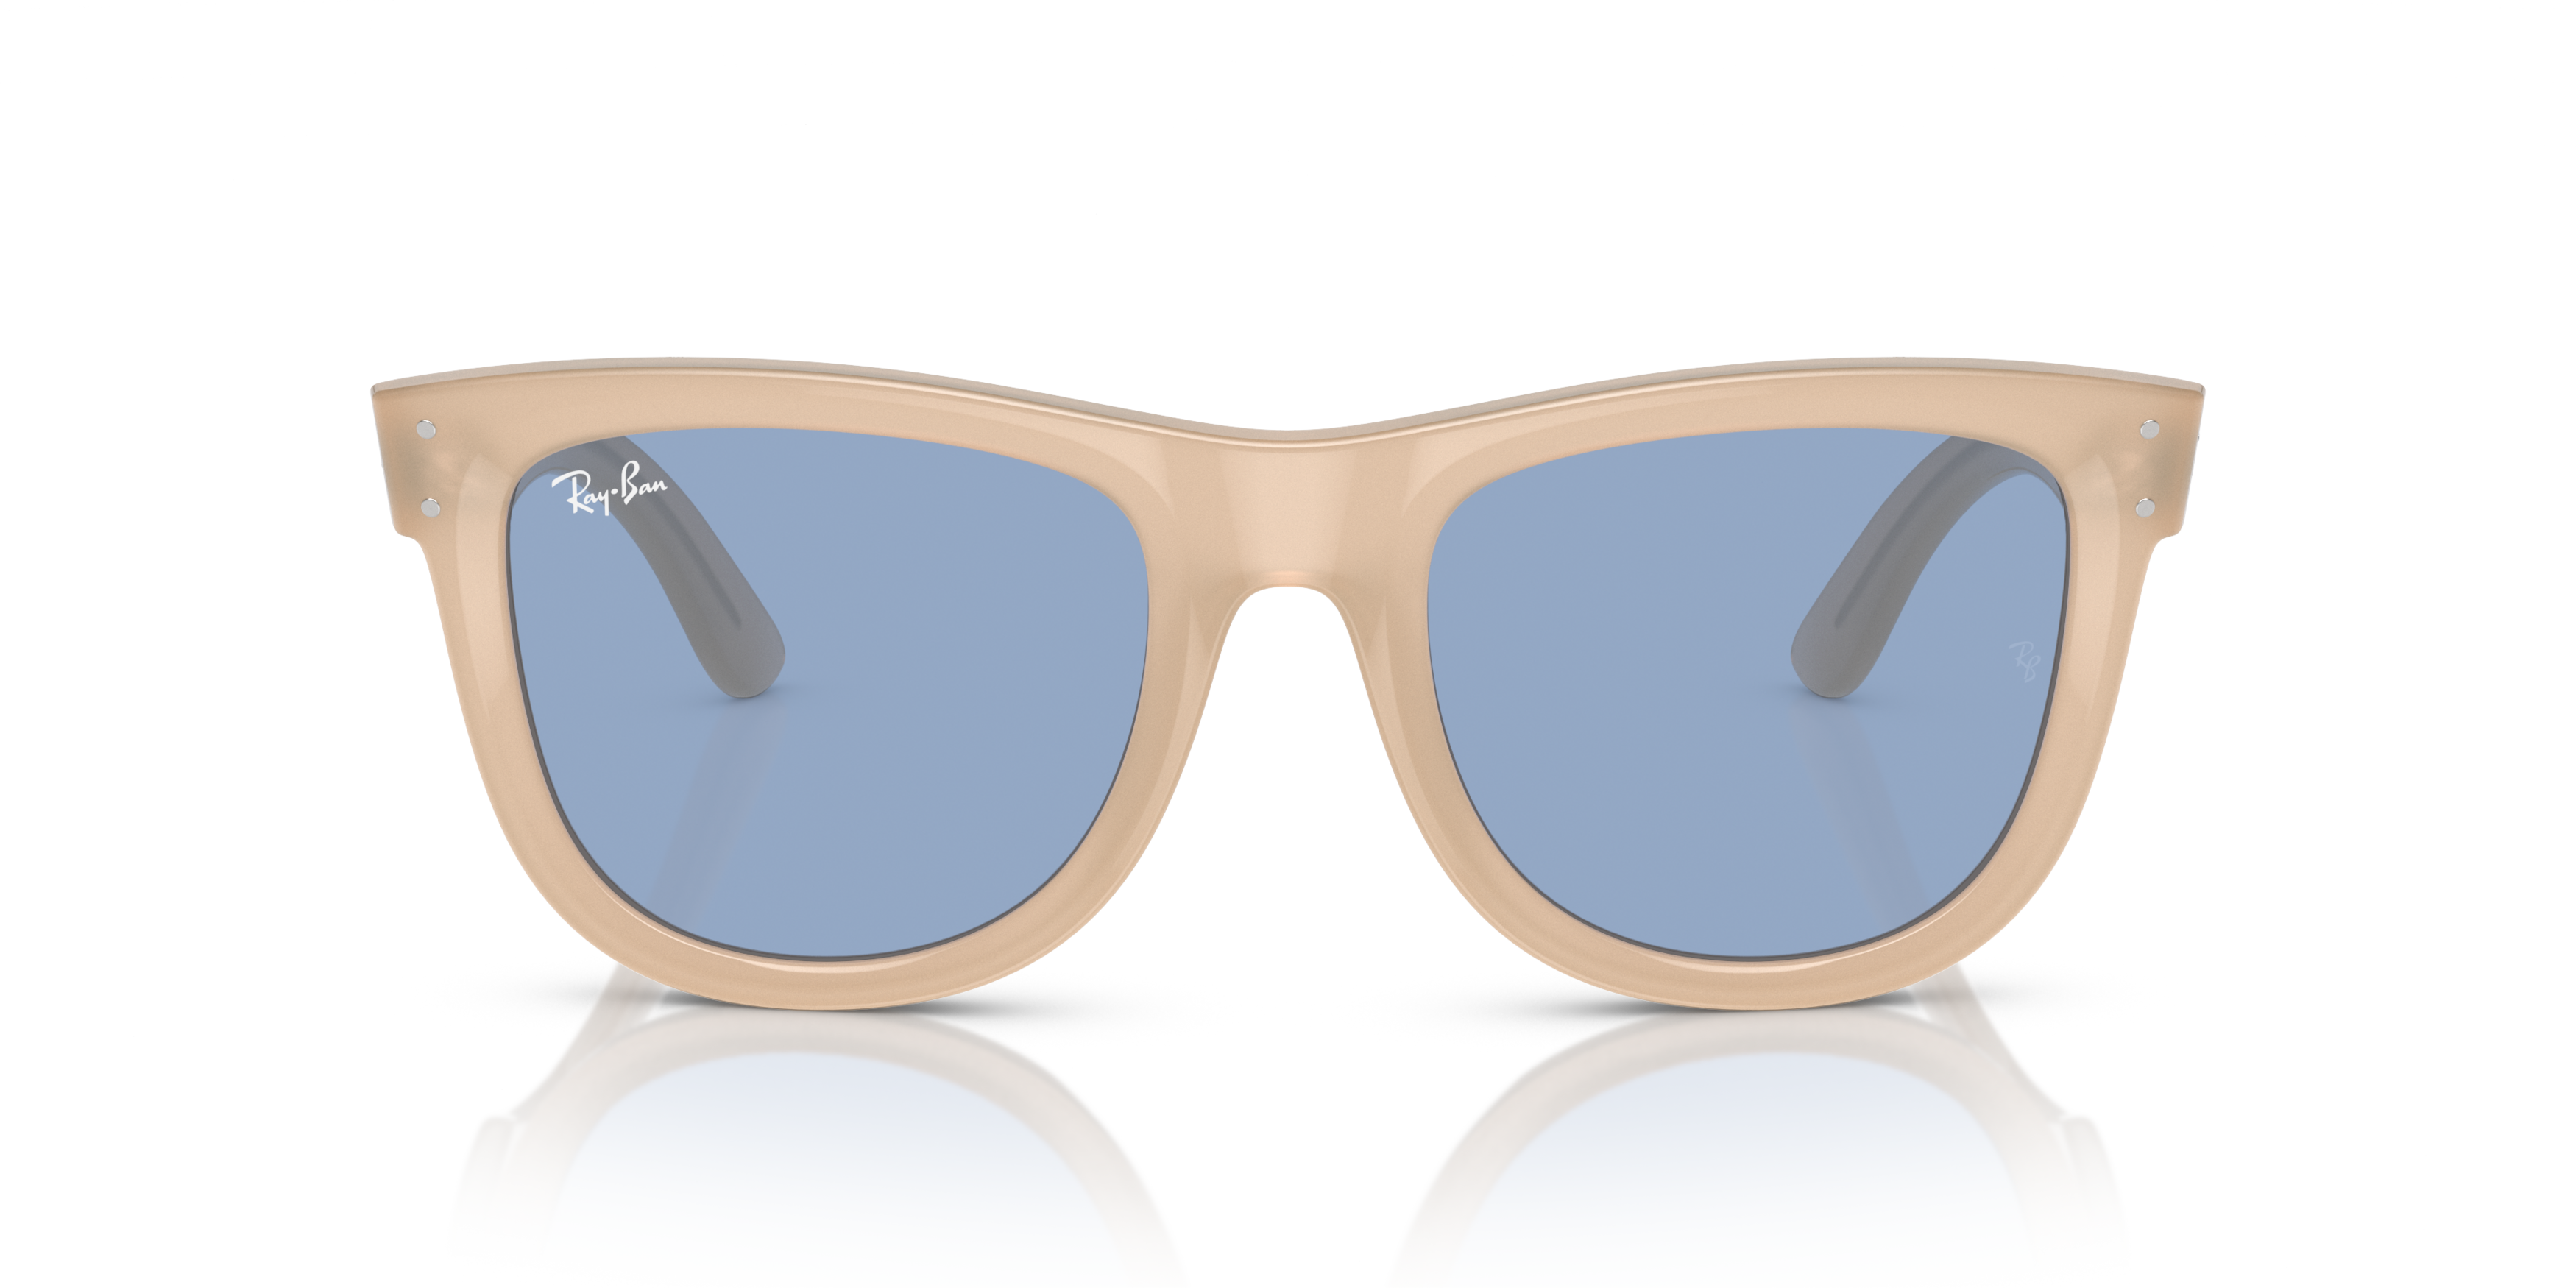 [products.image.front] Ray-Ban Wayfarer Reverse RBR 0502S Sunglasses